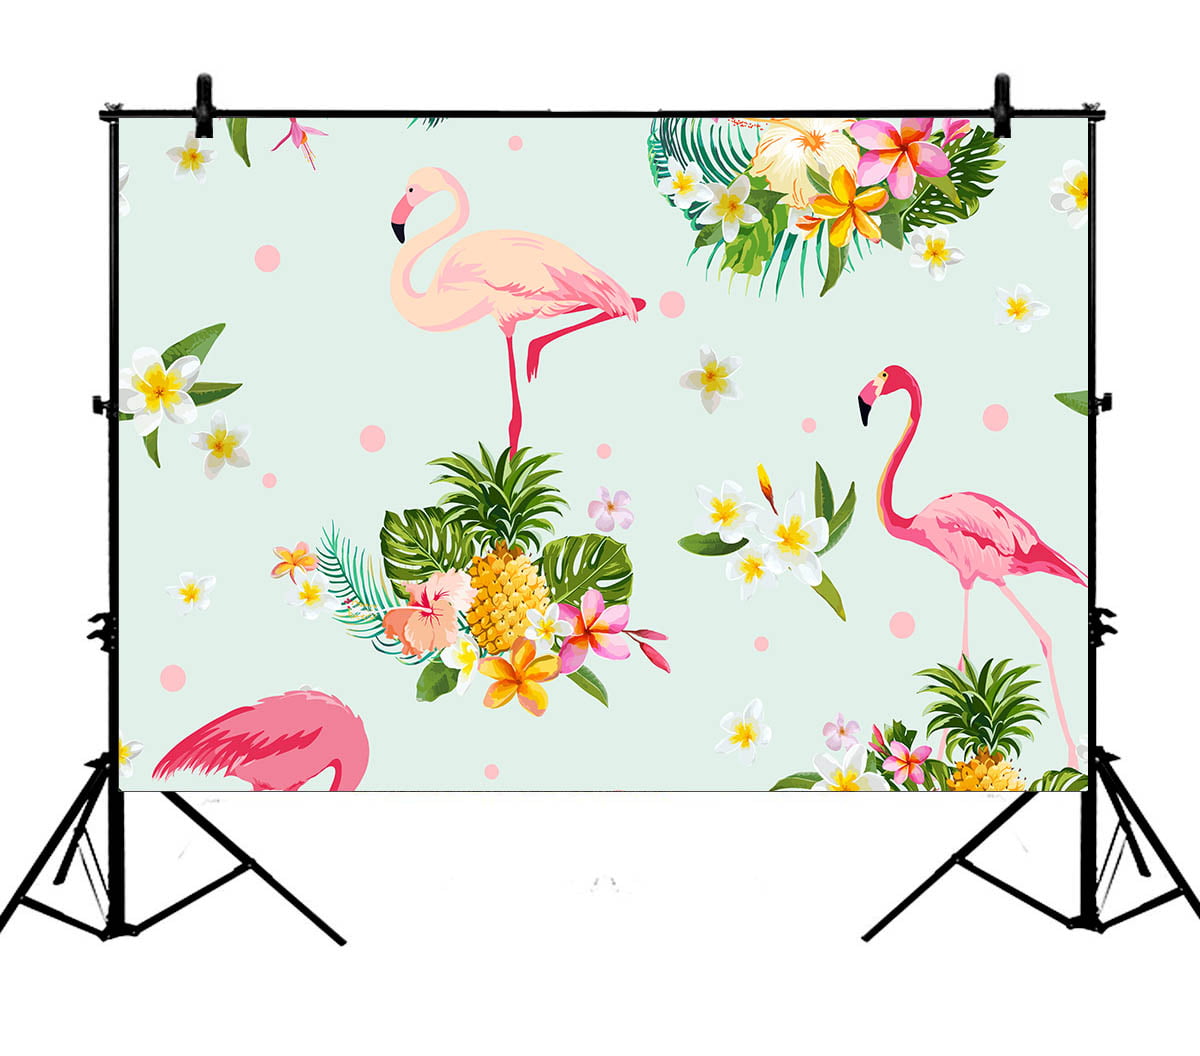 7x5ft Summer Party Backdrop Polyester Wood Board Photography Background Pineapple Sunglasses Children Kids Portrait Children Holiday Photo Vedio Studio Props